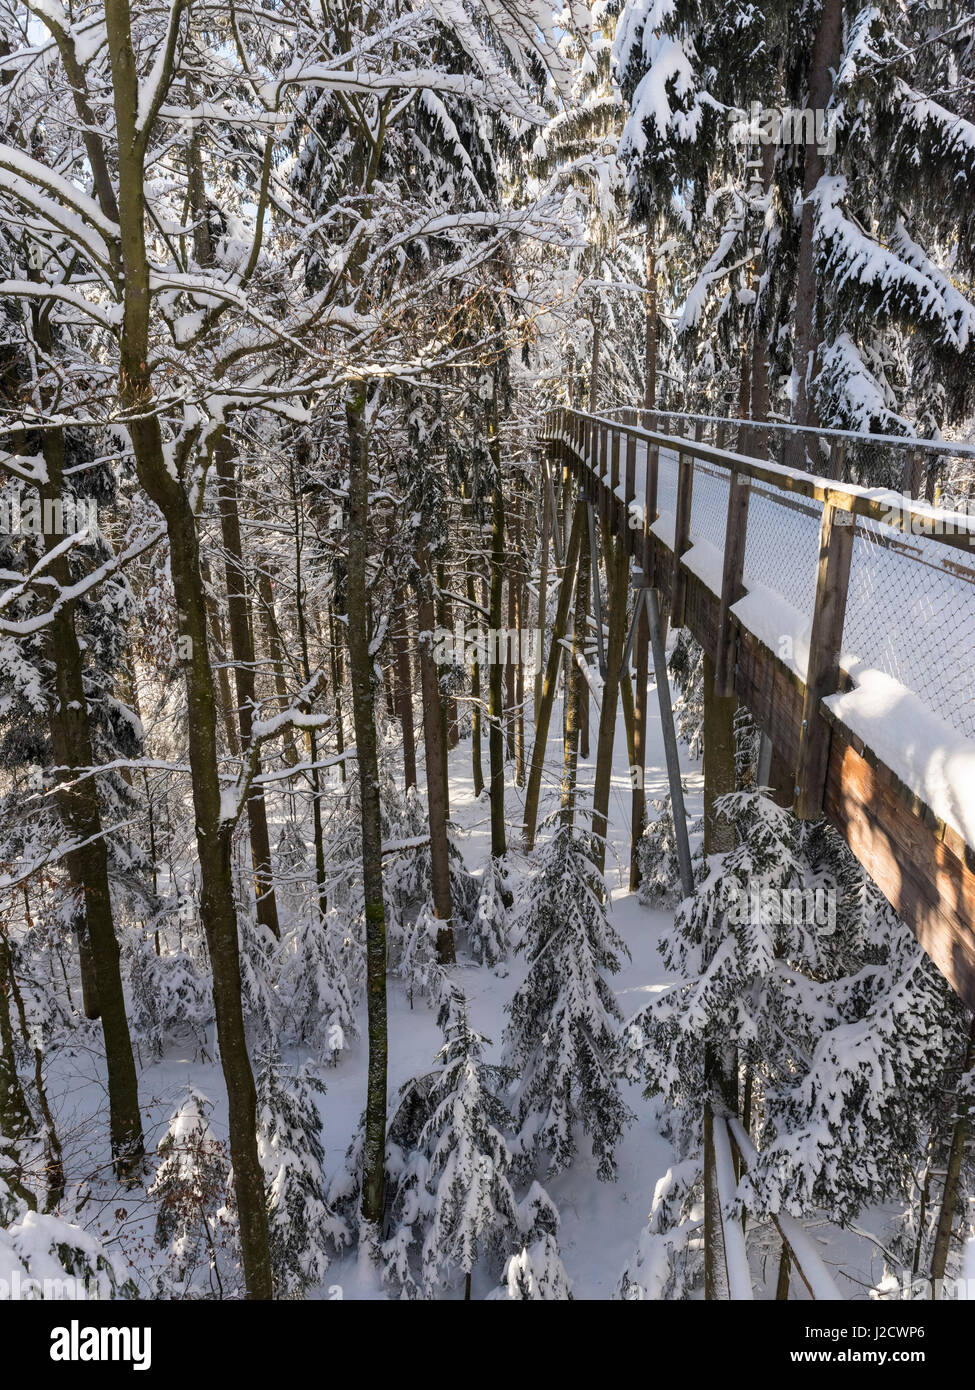 The Canopy Walkway (Baumwipfelpfad) of the visitor center of the National Park Bavarian Forest (Bayerischer Wald) in Neuschoenau in the deep of winter. Bavaria, Germany (Large format sizes available) Stock Photo